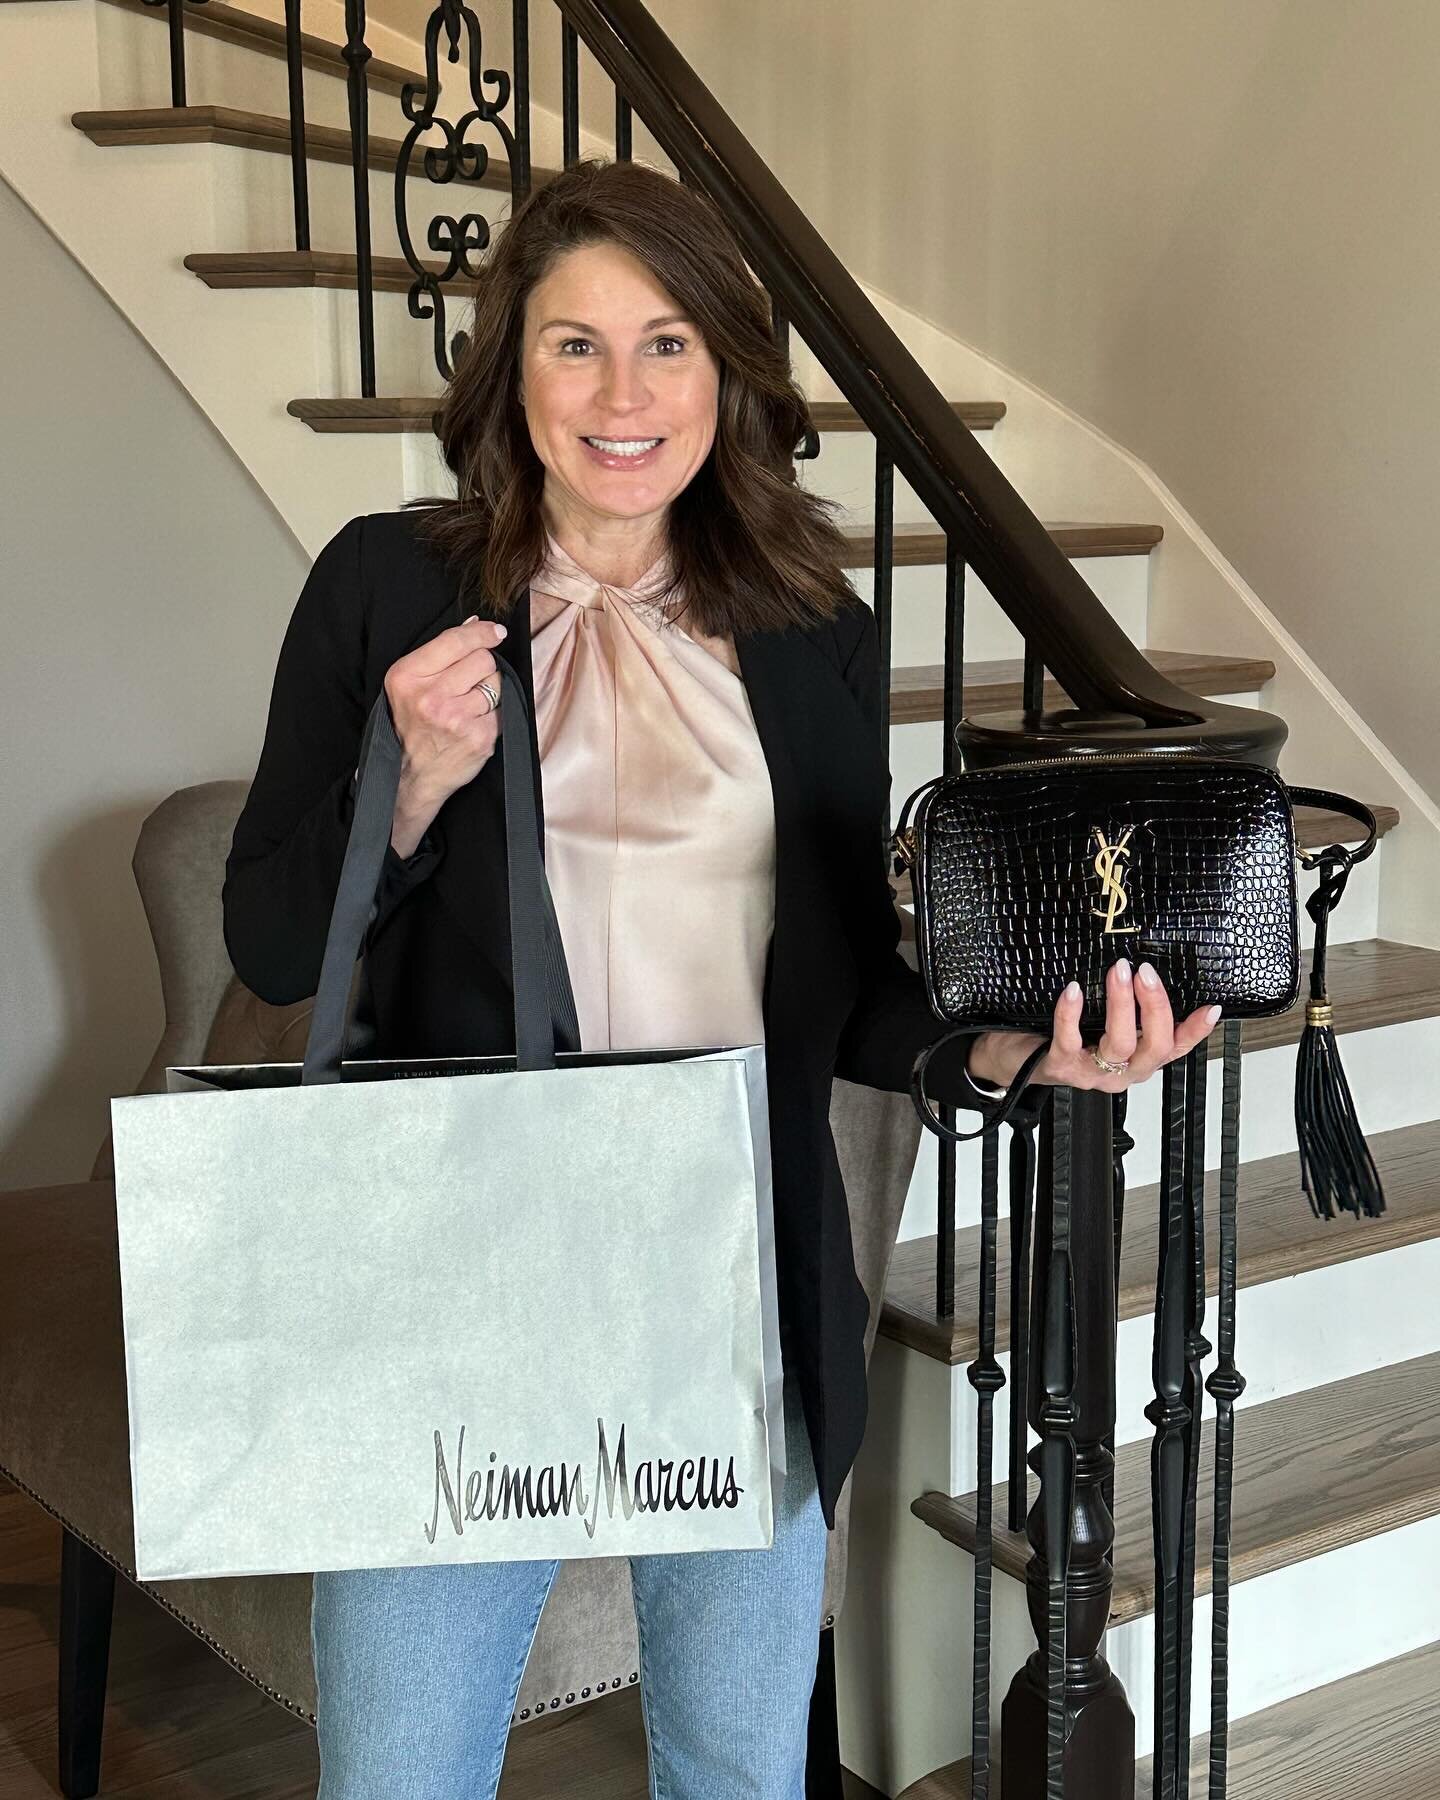 Congratulations to Debbie Meredith! This YSL bag looks great on you!  And a big thank you to Neiman Marcus for this generous donation.